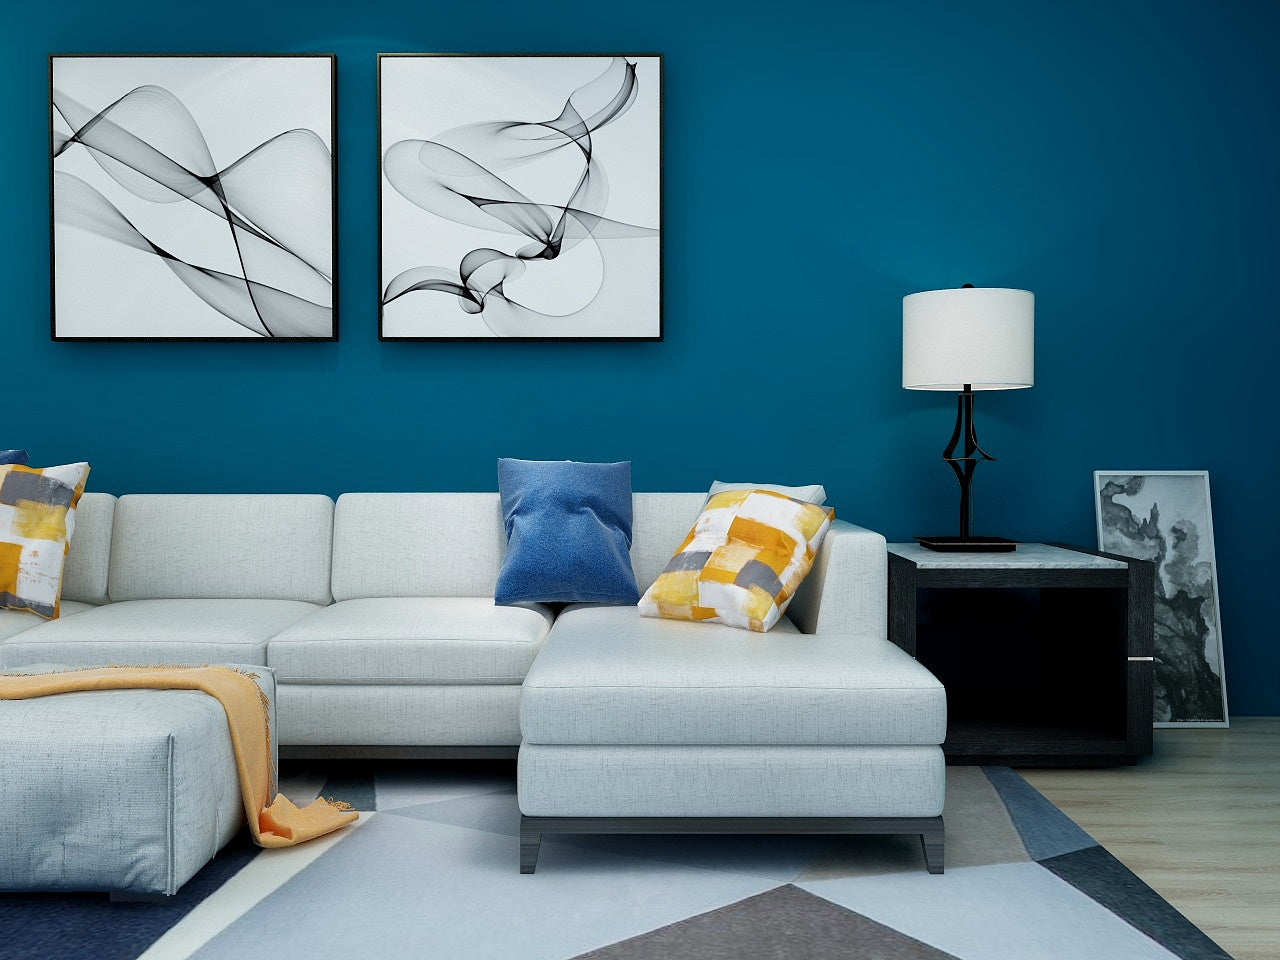 Photorealistic 3D Renders help to visualize what your space will look like before committing to any real changes.  Here we see a dramatic representation of a blue and gold color scheme, and show what a finished room will really look like.  No more guessing! 